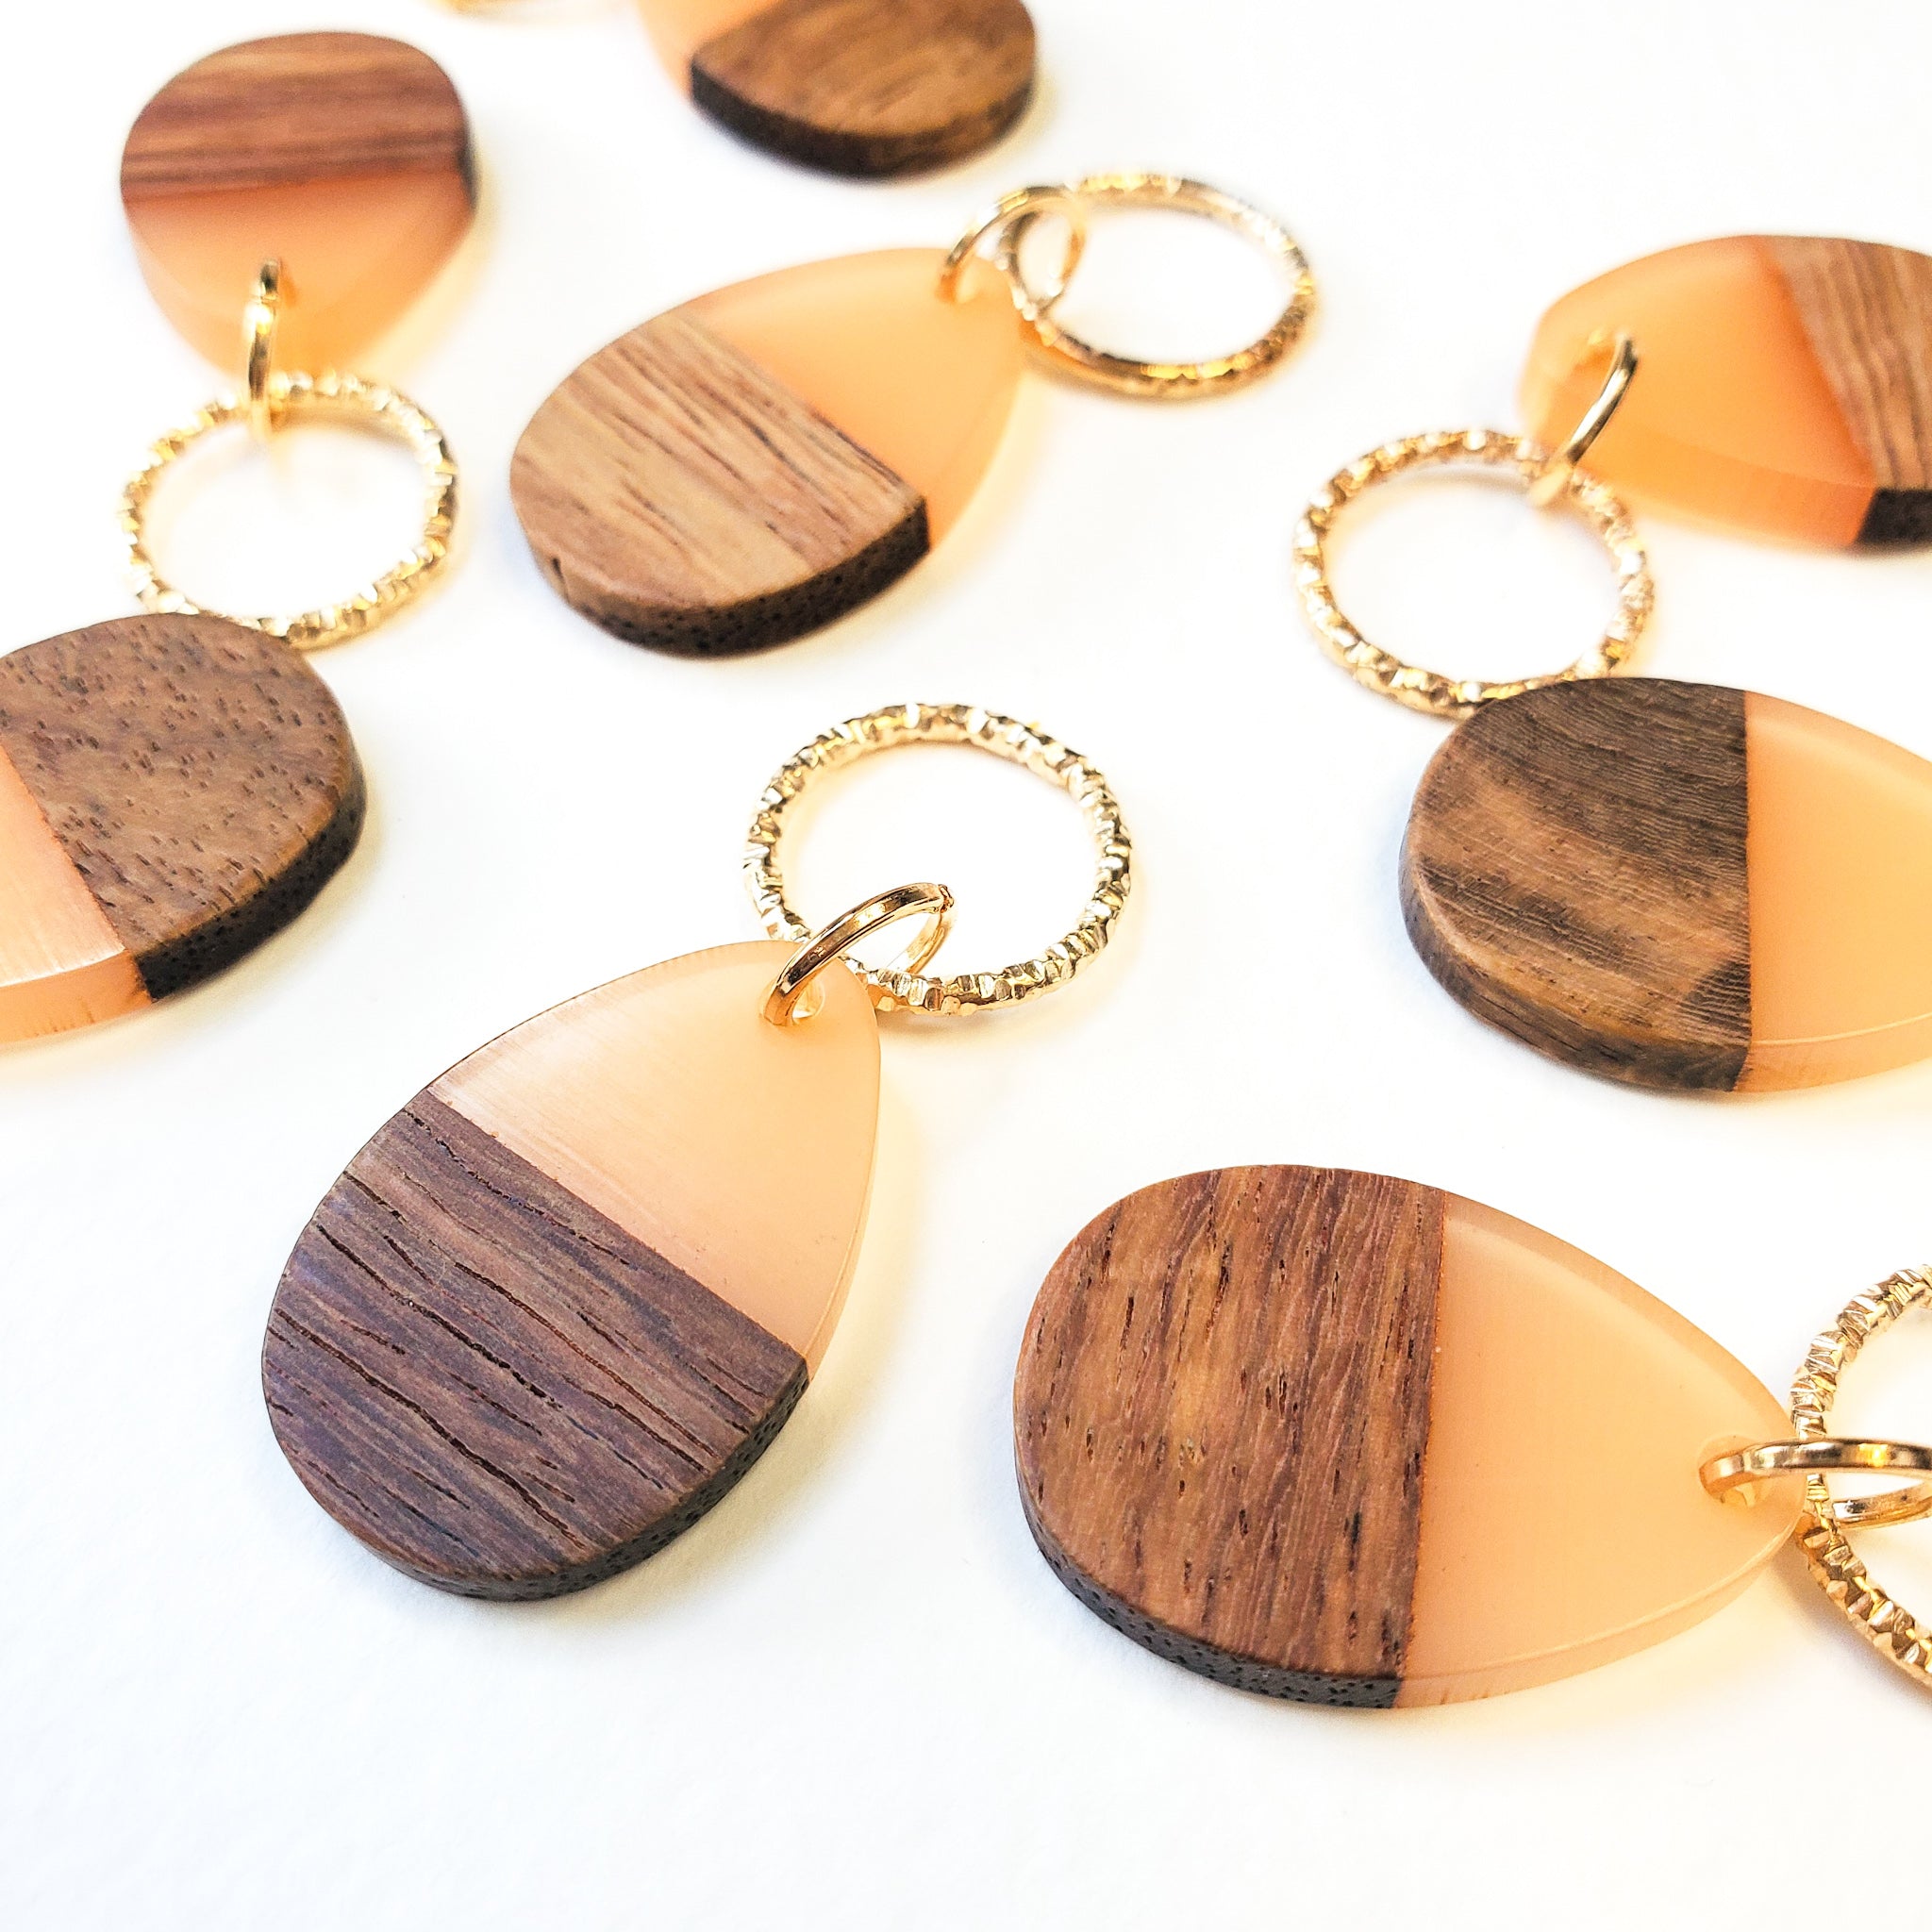 Peach Teardrop - Wood and Resin Stitch Marker